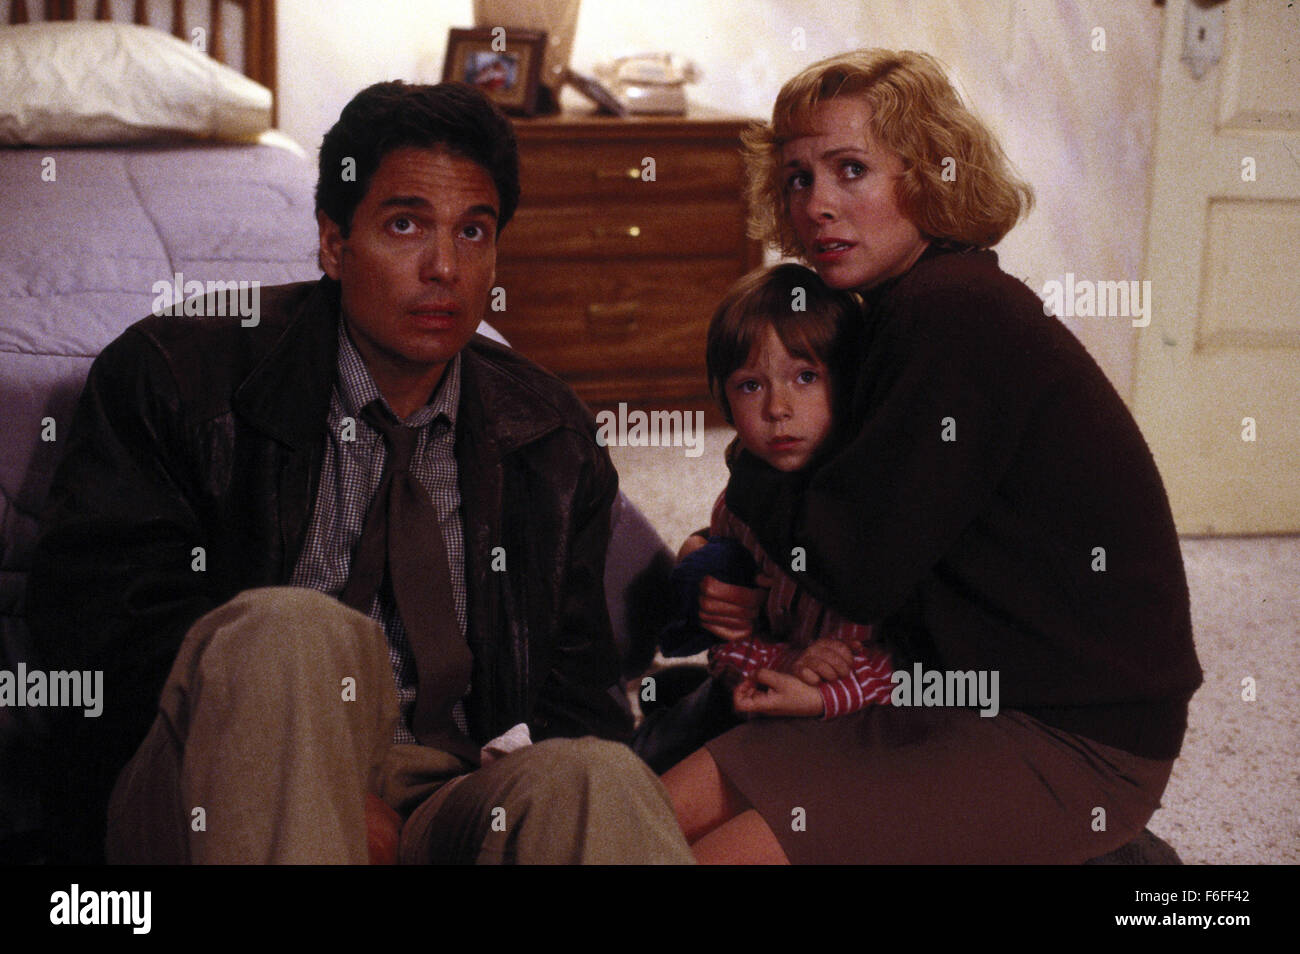 Nov 08, 1988; Chicago, IL, USA; (left to right) CHRIS SARANDON as Mike Norris, ALEX VINCENT as Andy Barclay, and CATHERINE HICKS as Karen Barclay in the horror film 'Child's Play' directed by Tom Holland. Stock Photo